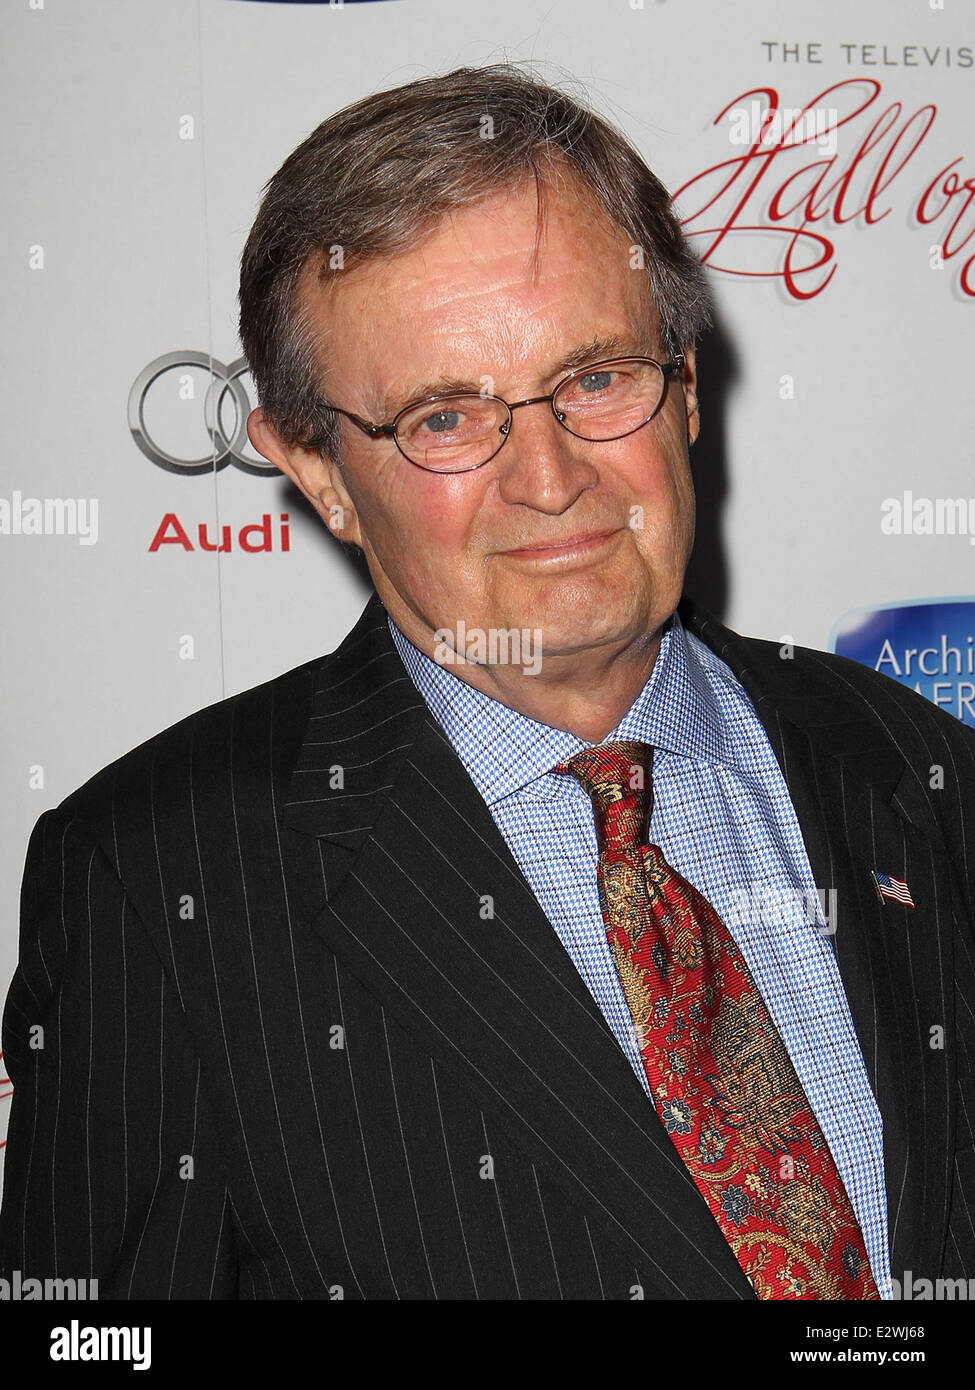 The Academy of Television Arts & Sciences' 22nd Annual Hall of Fame Induction Gala at The Beverly Hilton Hotel - Arrivals  Featuring: David McCallum Where: Beverly Hills, California, United States When: 11 Mar 2013 Stock Photo